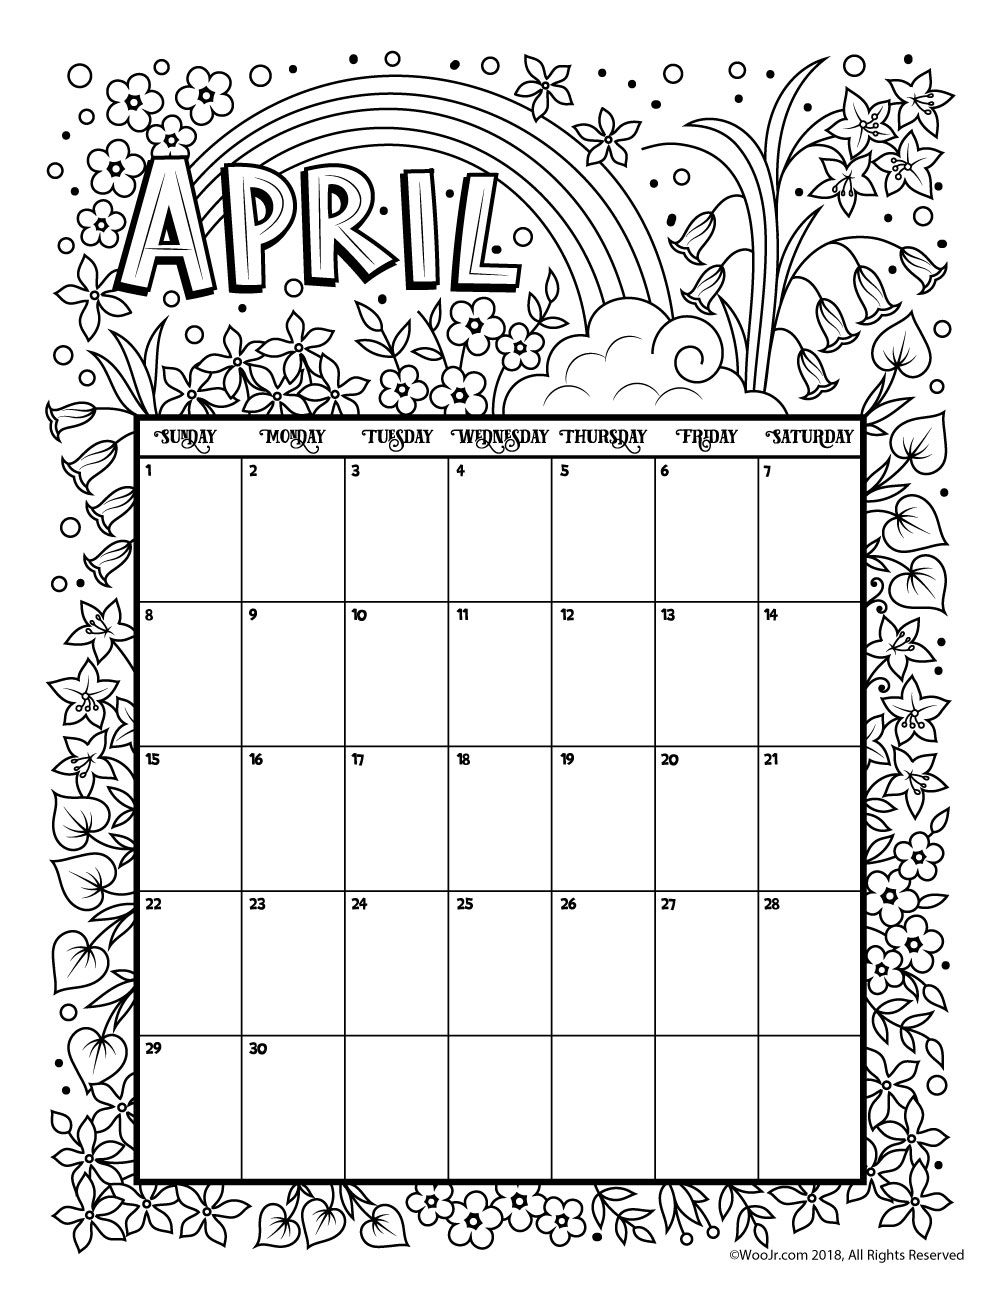 April Calendar Coloring Page Free Printable Coloring Pages